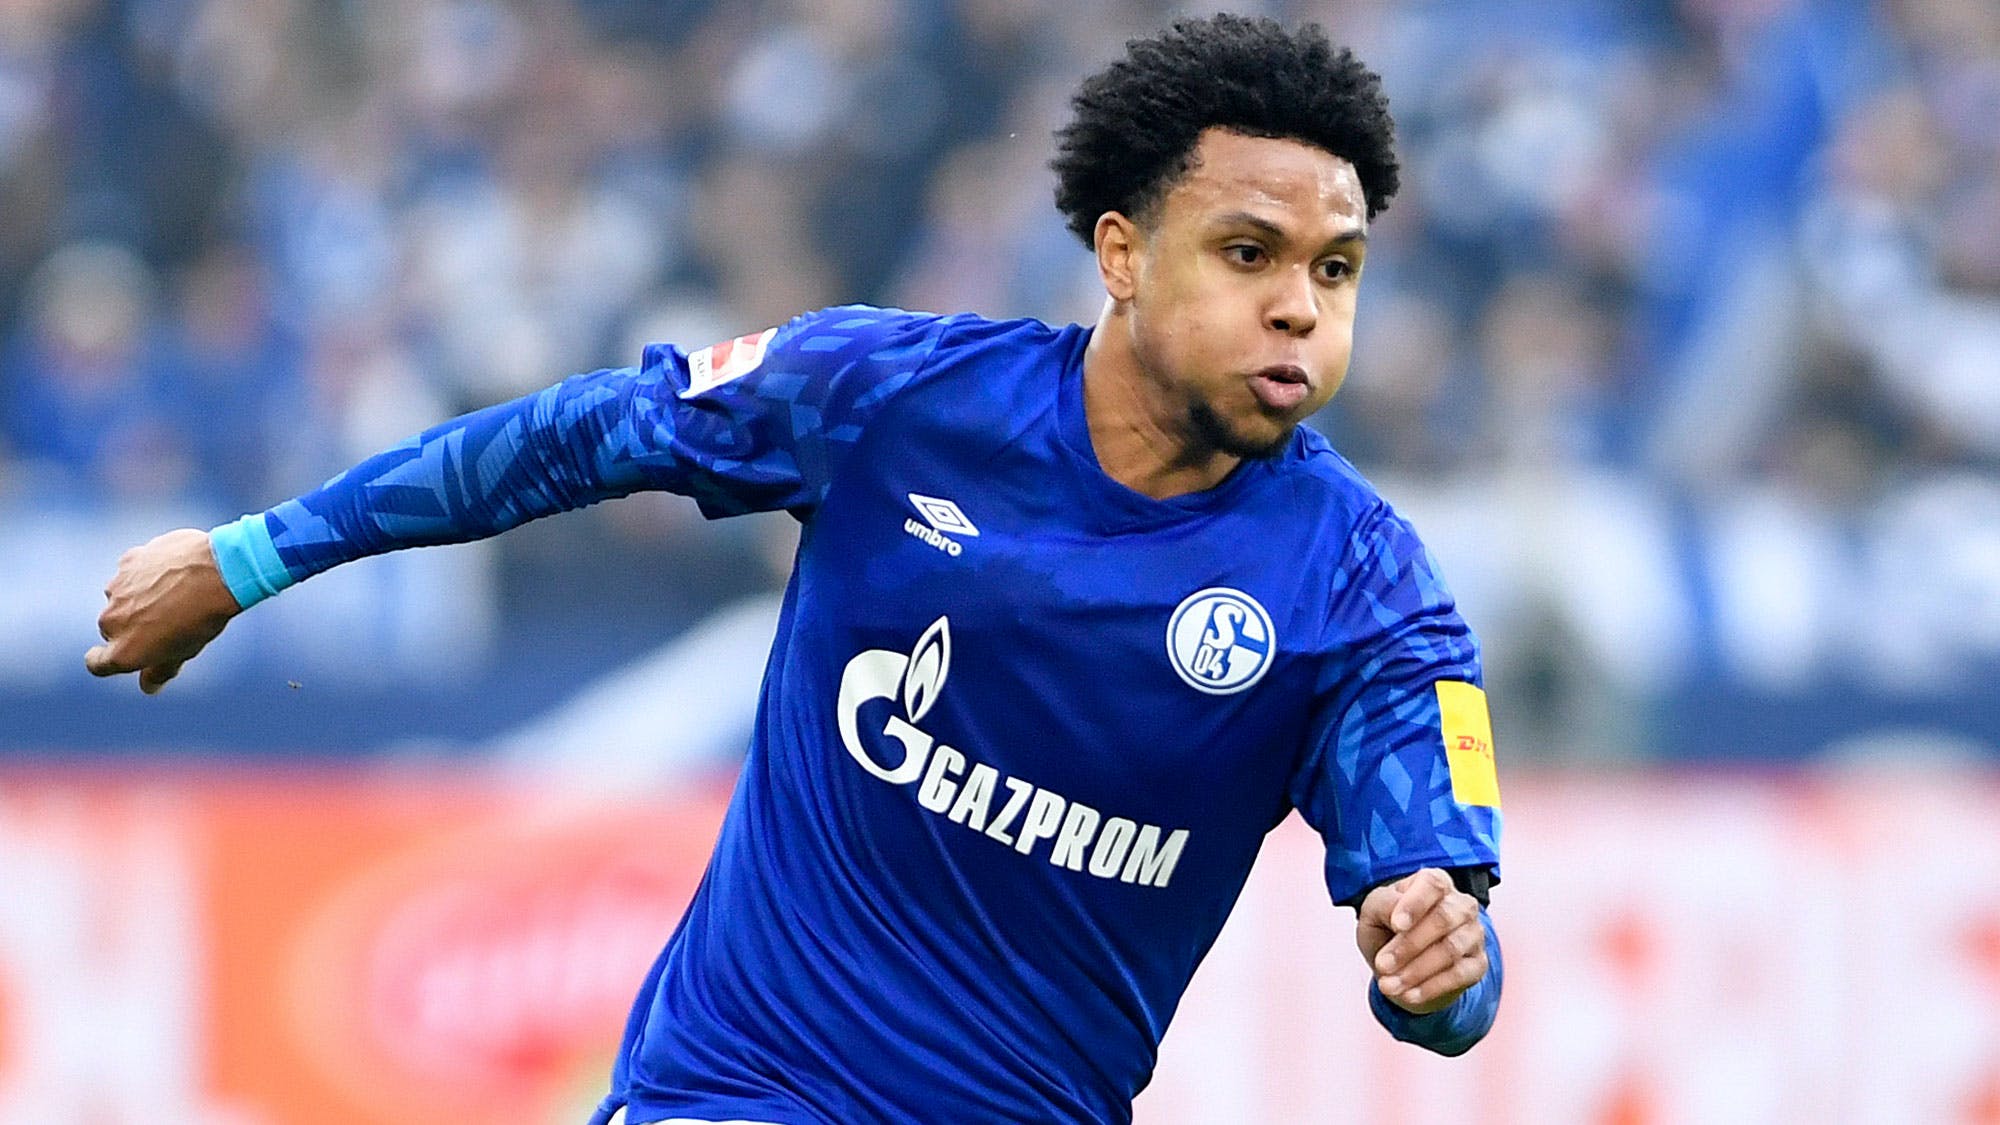 Before moving to Juventus, Weston McKennie joined the Schalke 04 youth academy in 2016 and has been playing at Gelsenkirchen ever since